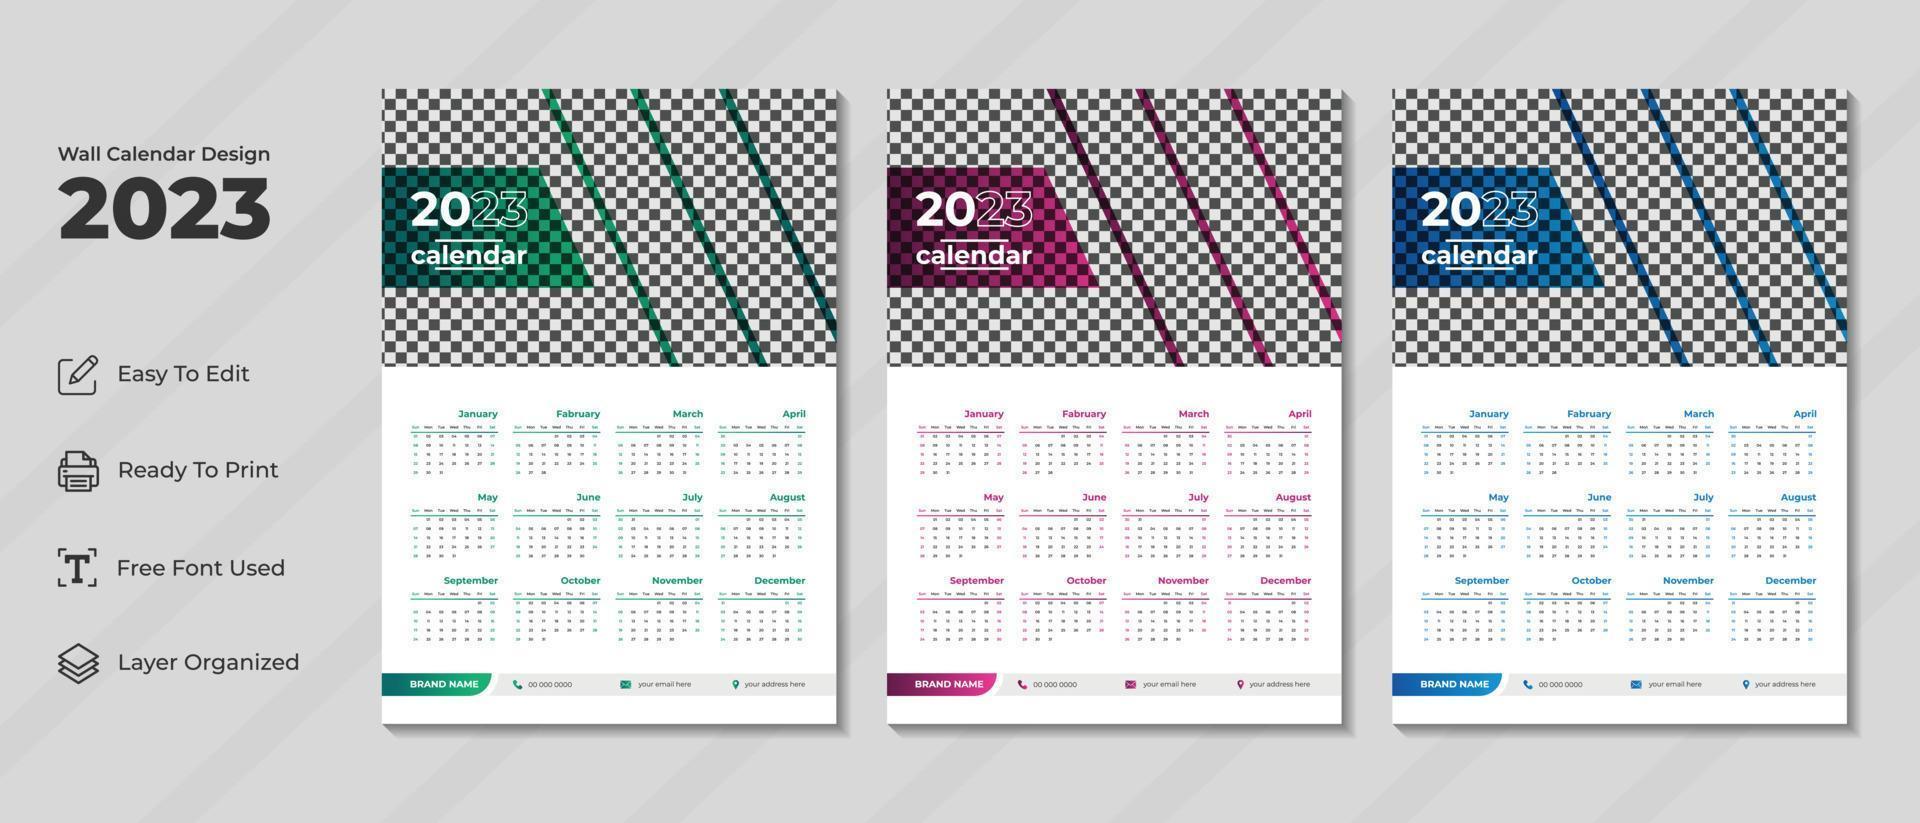 2023 wall calendar design template with green, purple and blue color. Corporate and business planner diary. Week starts on Sunday. Modern wall calendar design for new year 2023. vector